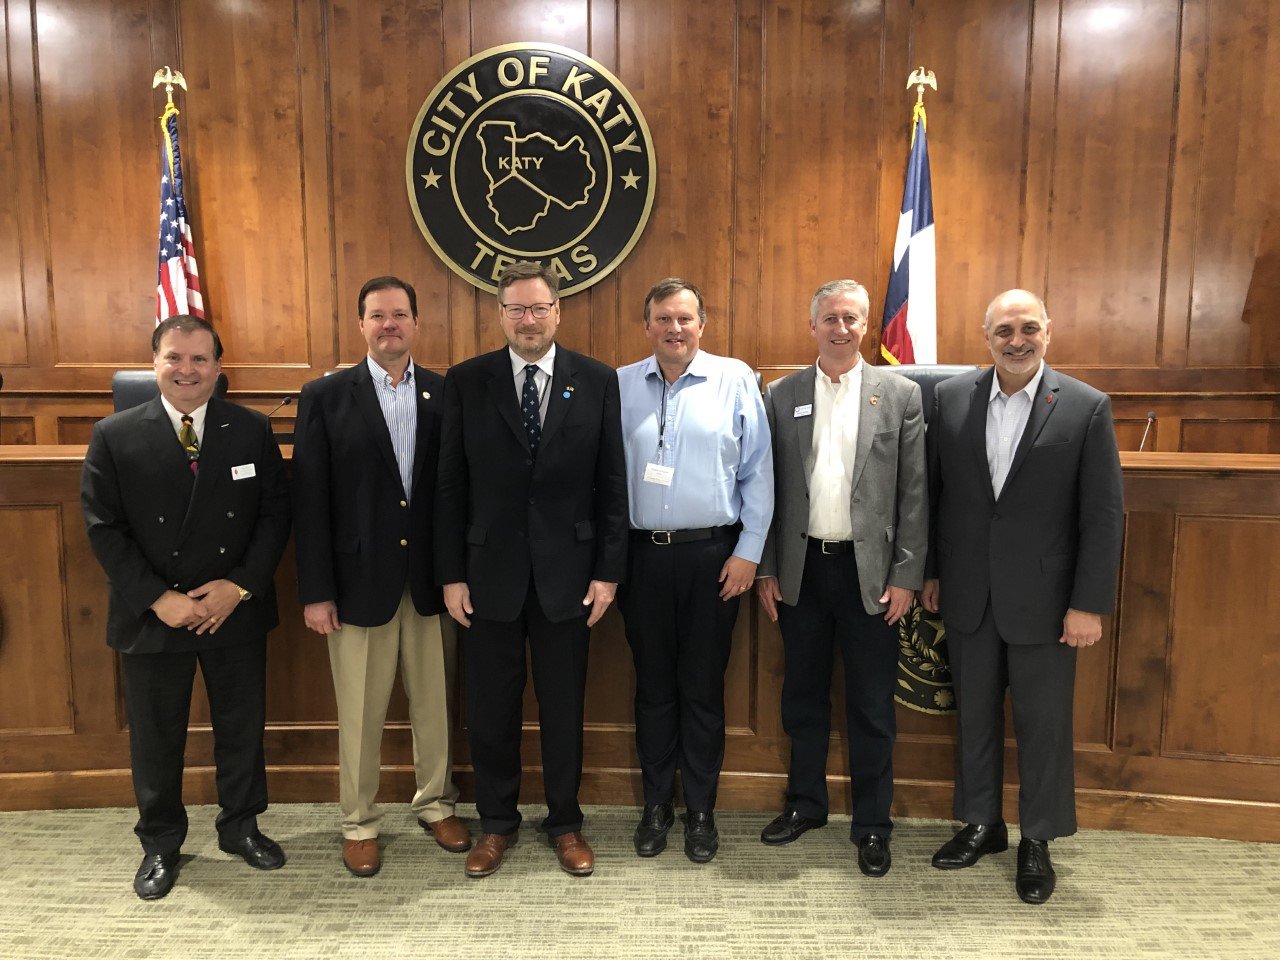 Katy city leaders welcomed a Belgian business delegation to Katy Oct. 13. Pictured from left to right are Paul Kurt, Katy Area EDC chairman; Byron Hebert, Katy city administrator; Yves Dubus, Belgian trade and investment commissioner; Philippe LaChapelle, Wallonia director of technology and strategic partnerships, Mayor Dusty Thiele, and Chuck Martinez, Katy Area EDC president.